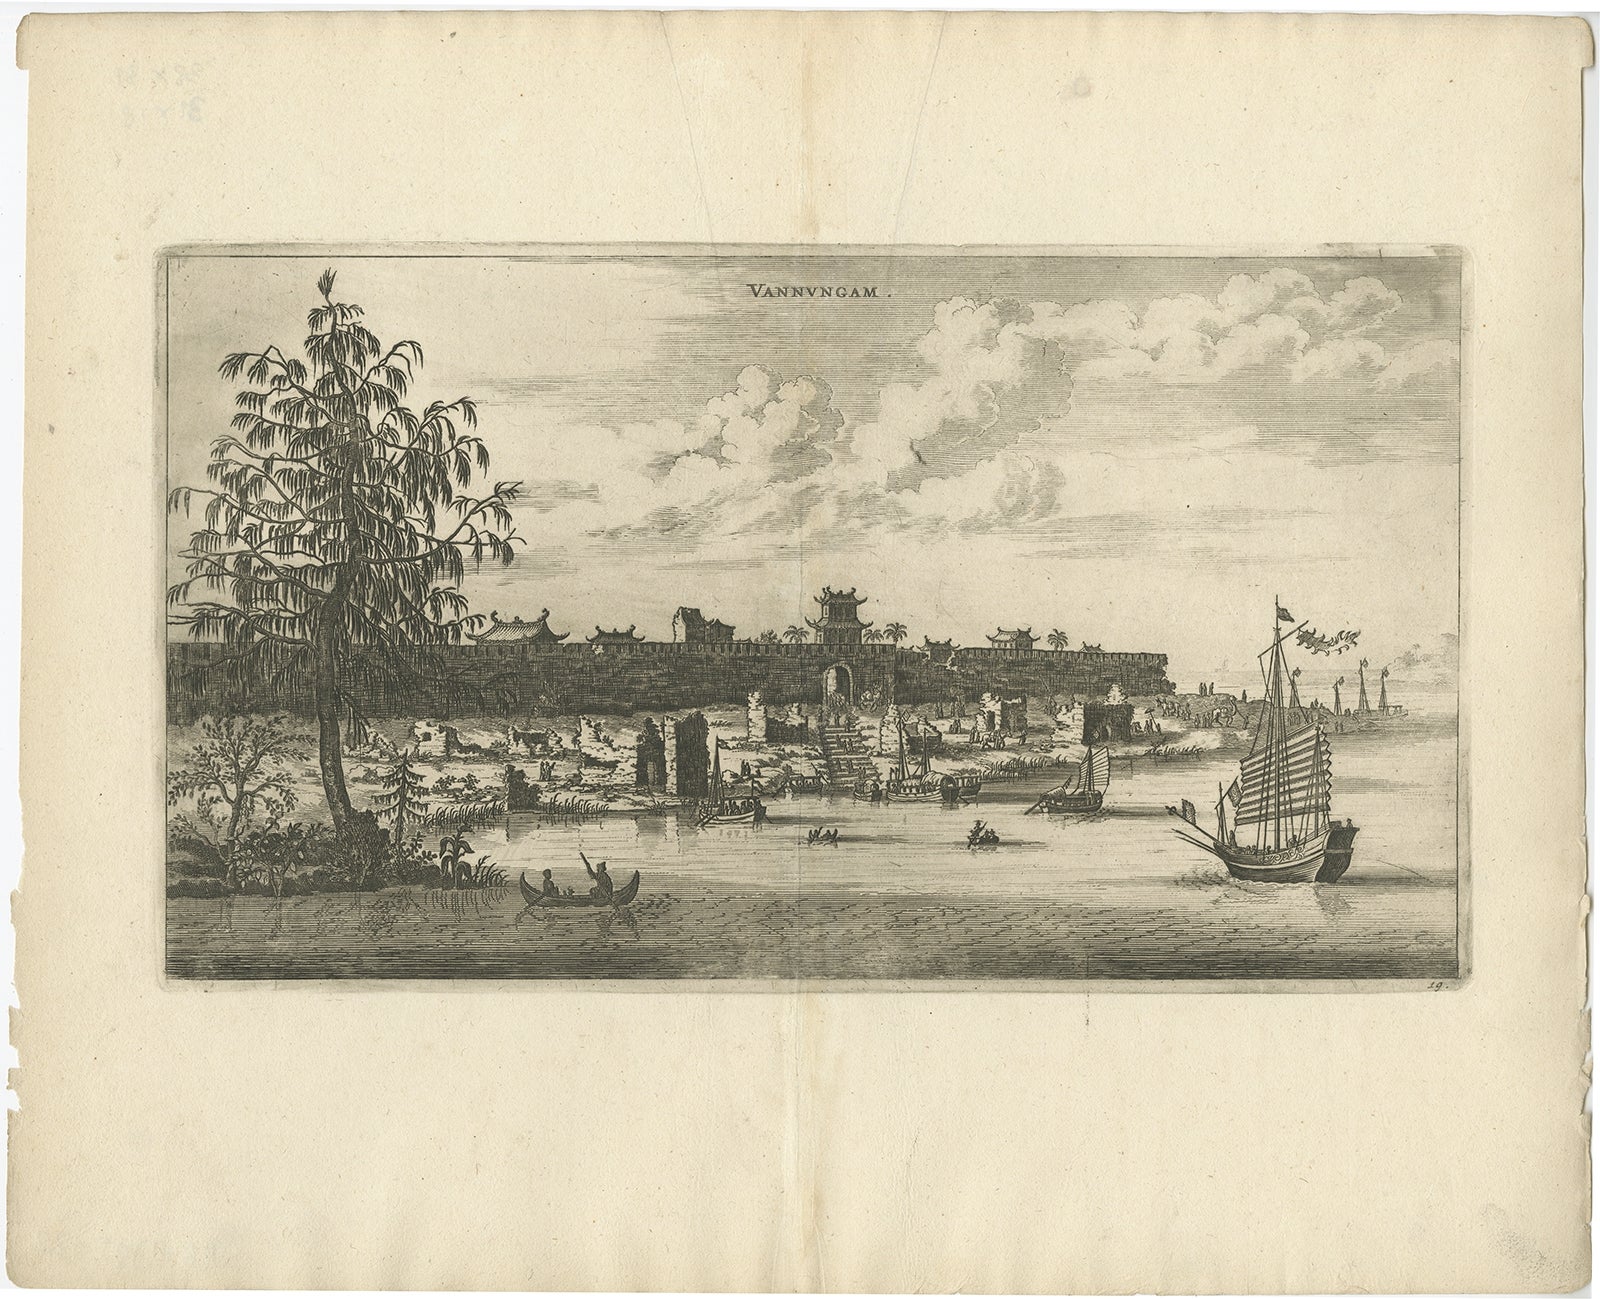 Antique Print of the City of Uannungam in China, 1668